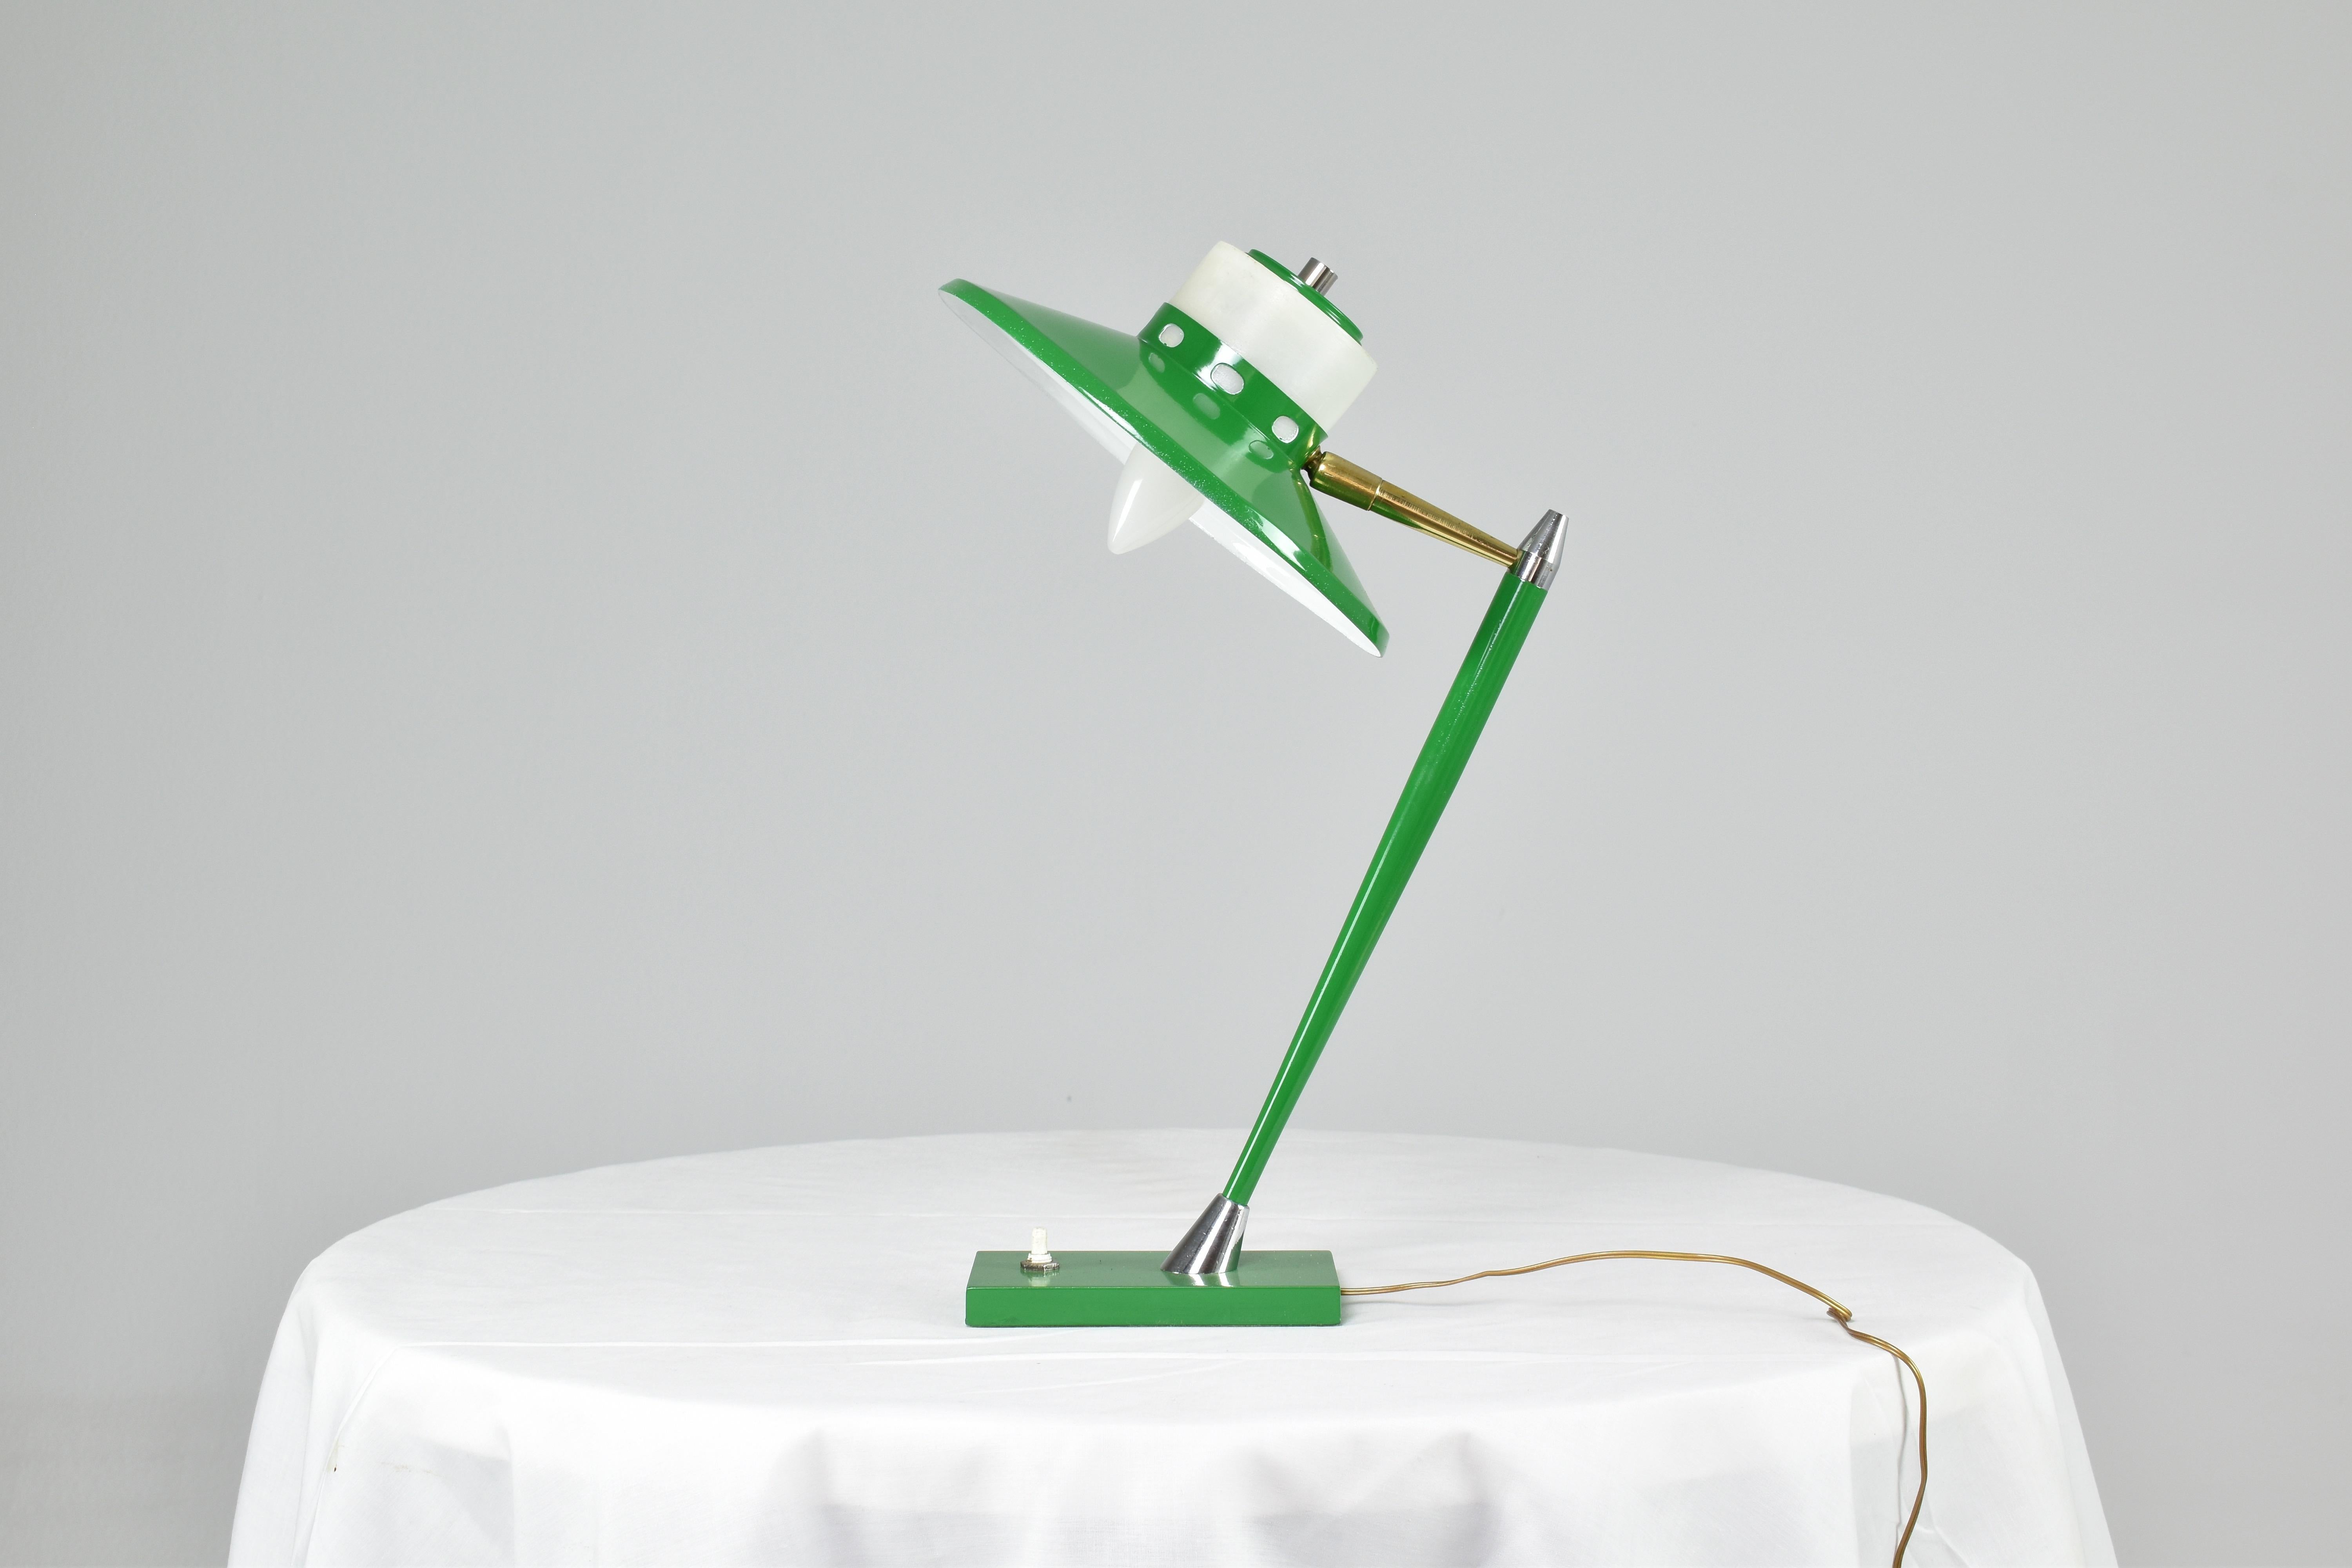 Stylish bright green Italian mid-century modern desk or table lamp by Stilux with adjustable shade and push type button at the base. This superb design is highlighted by brass and silver metallic details.
Italy. 1950s
The wire is new, plug is of